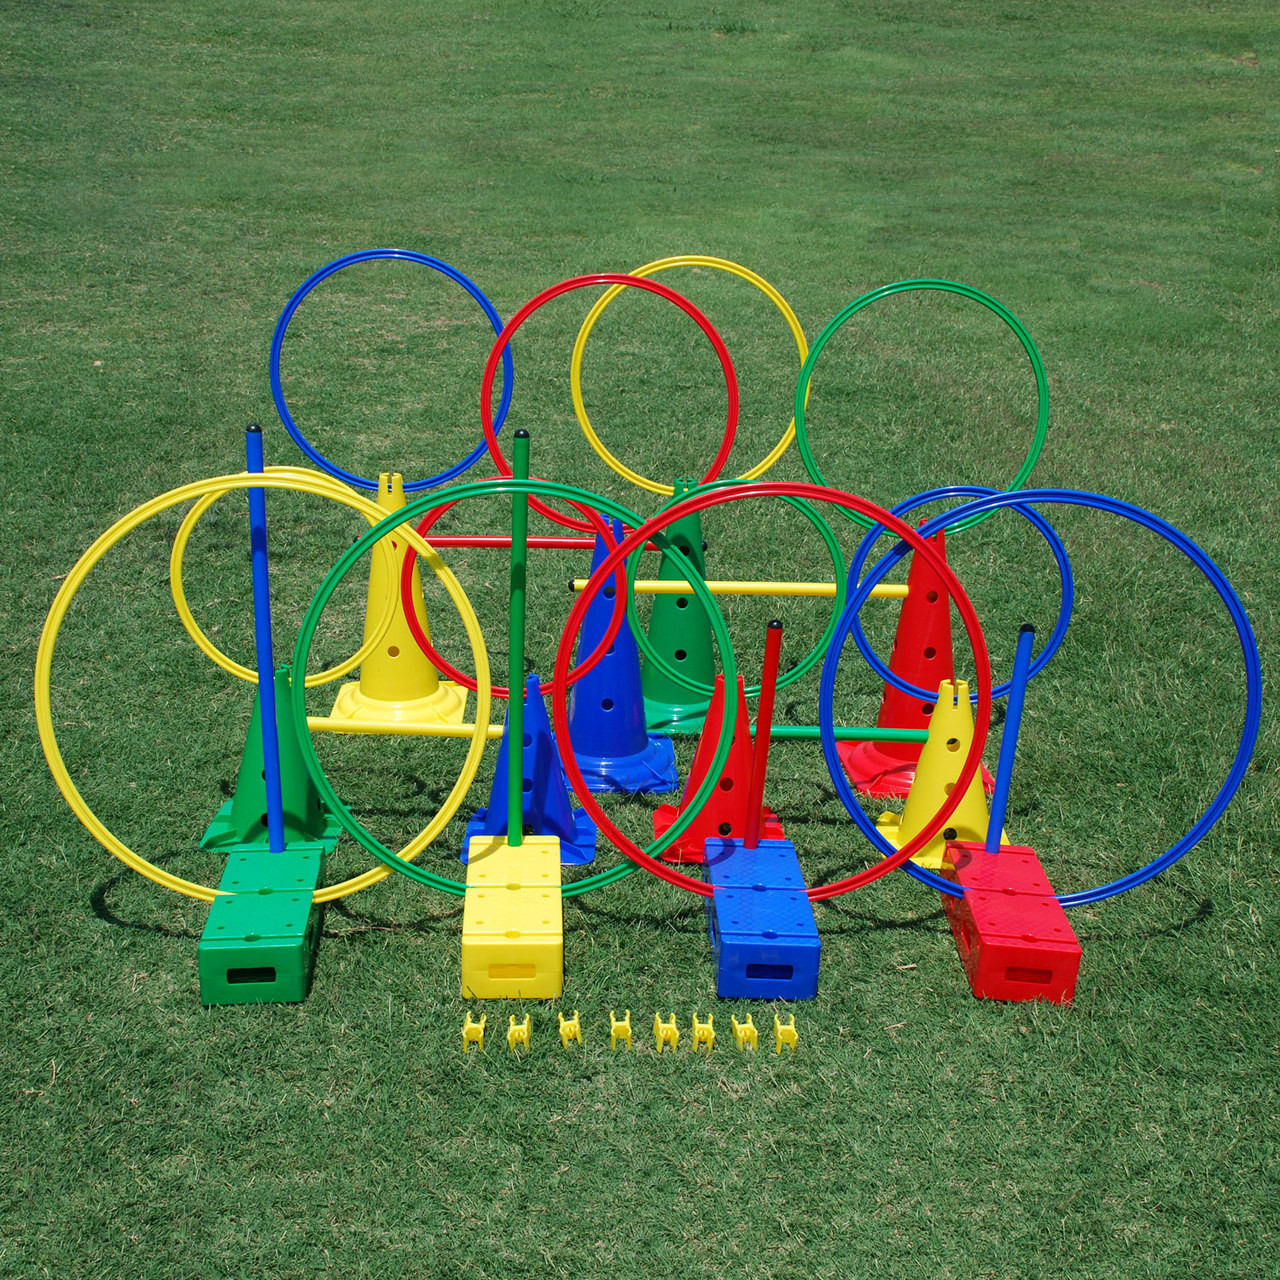 Champion Sports Lawn Darts for Kids: Classic Toss Game & Backyard Party Toy  for Families - Safe Plastic Dart & Target Ring Set - Indoor & Outdoor Use  Blue : Toss Games : Sports & Outdoors - Amazon.com